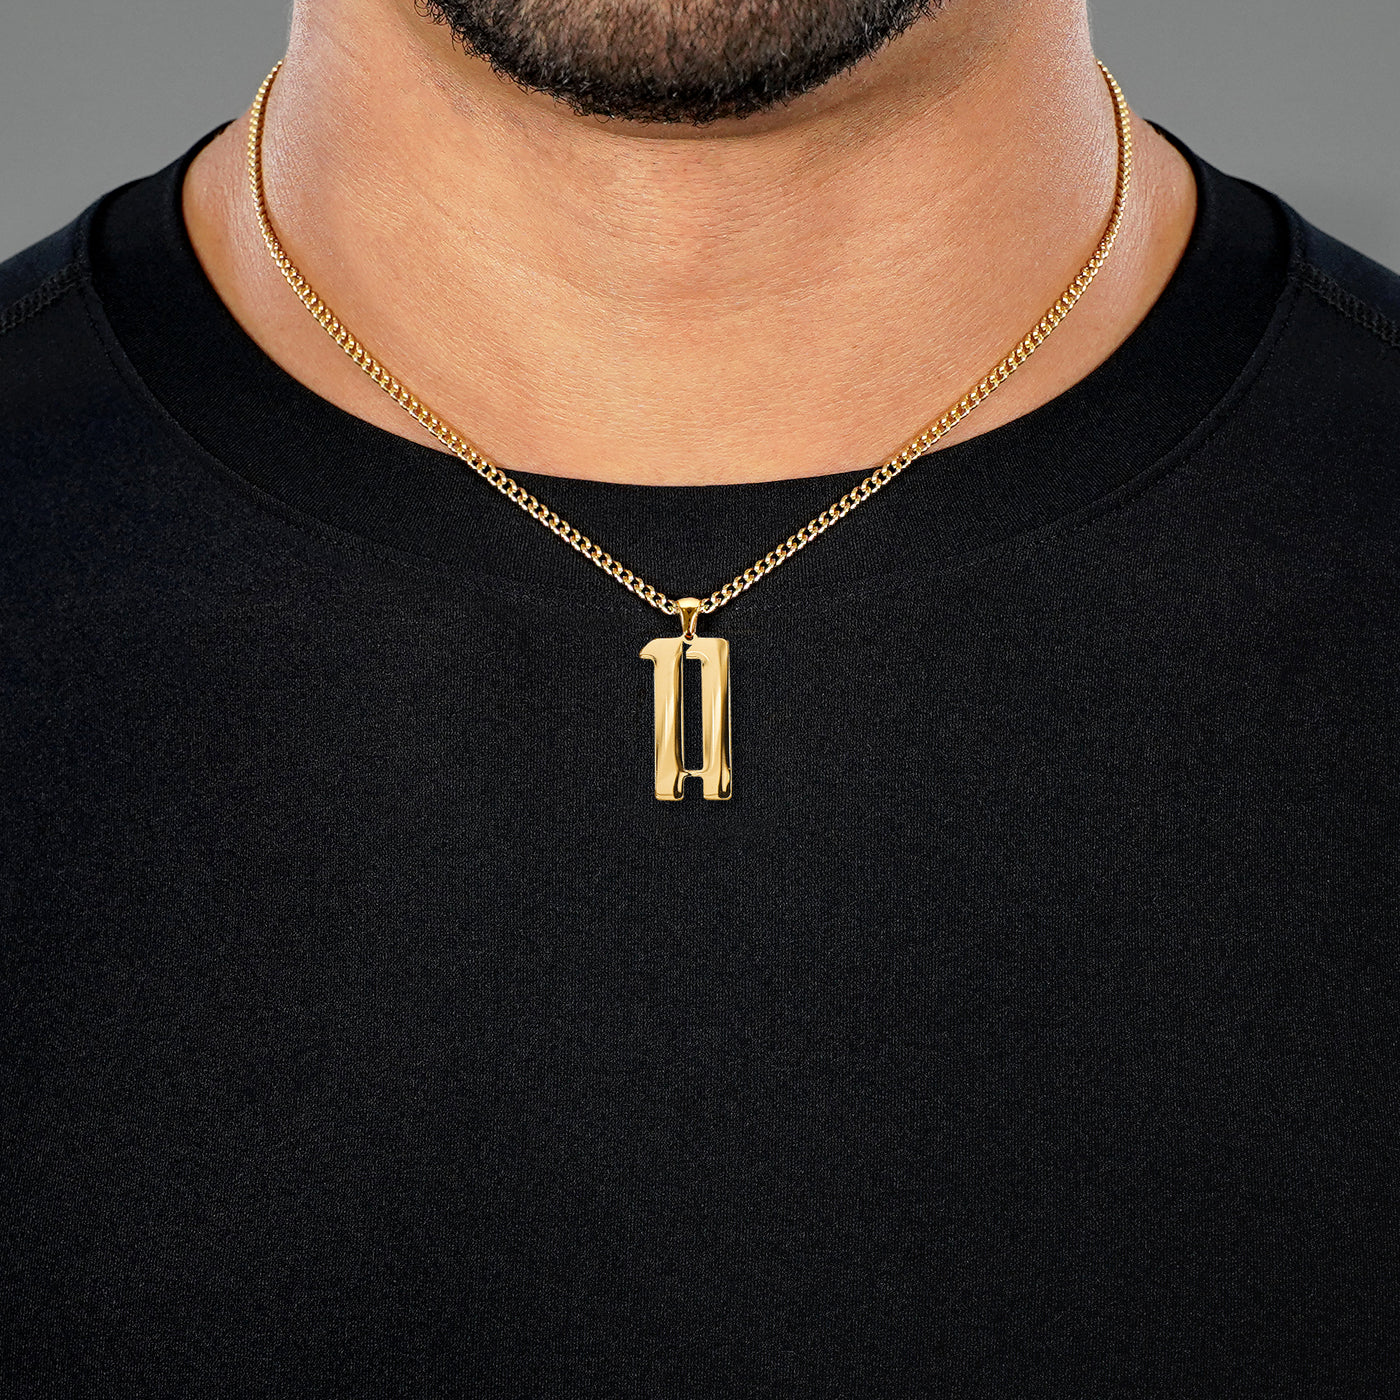 11 Number Pendant with Chain Necklace - Gold Plated Stainless Steel